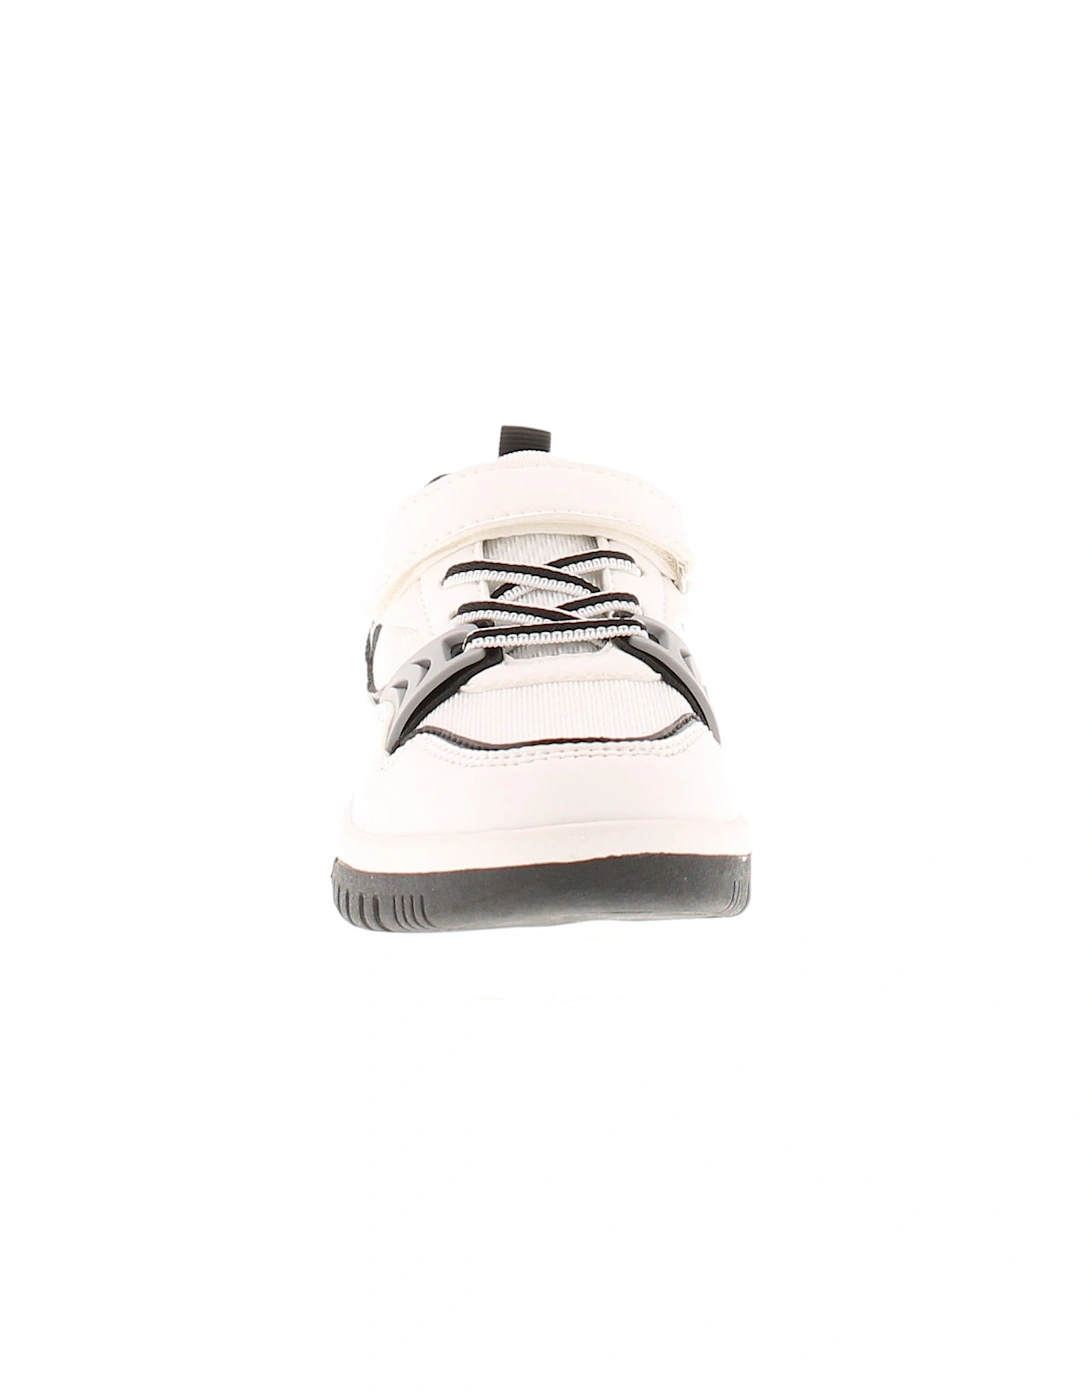 Childrens Trainers Alex Lace Up white UK Size